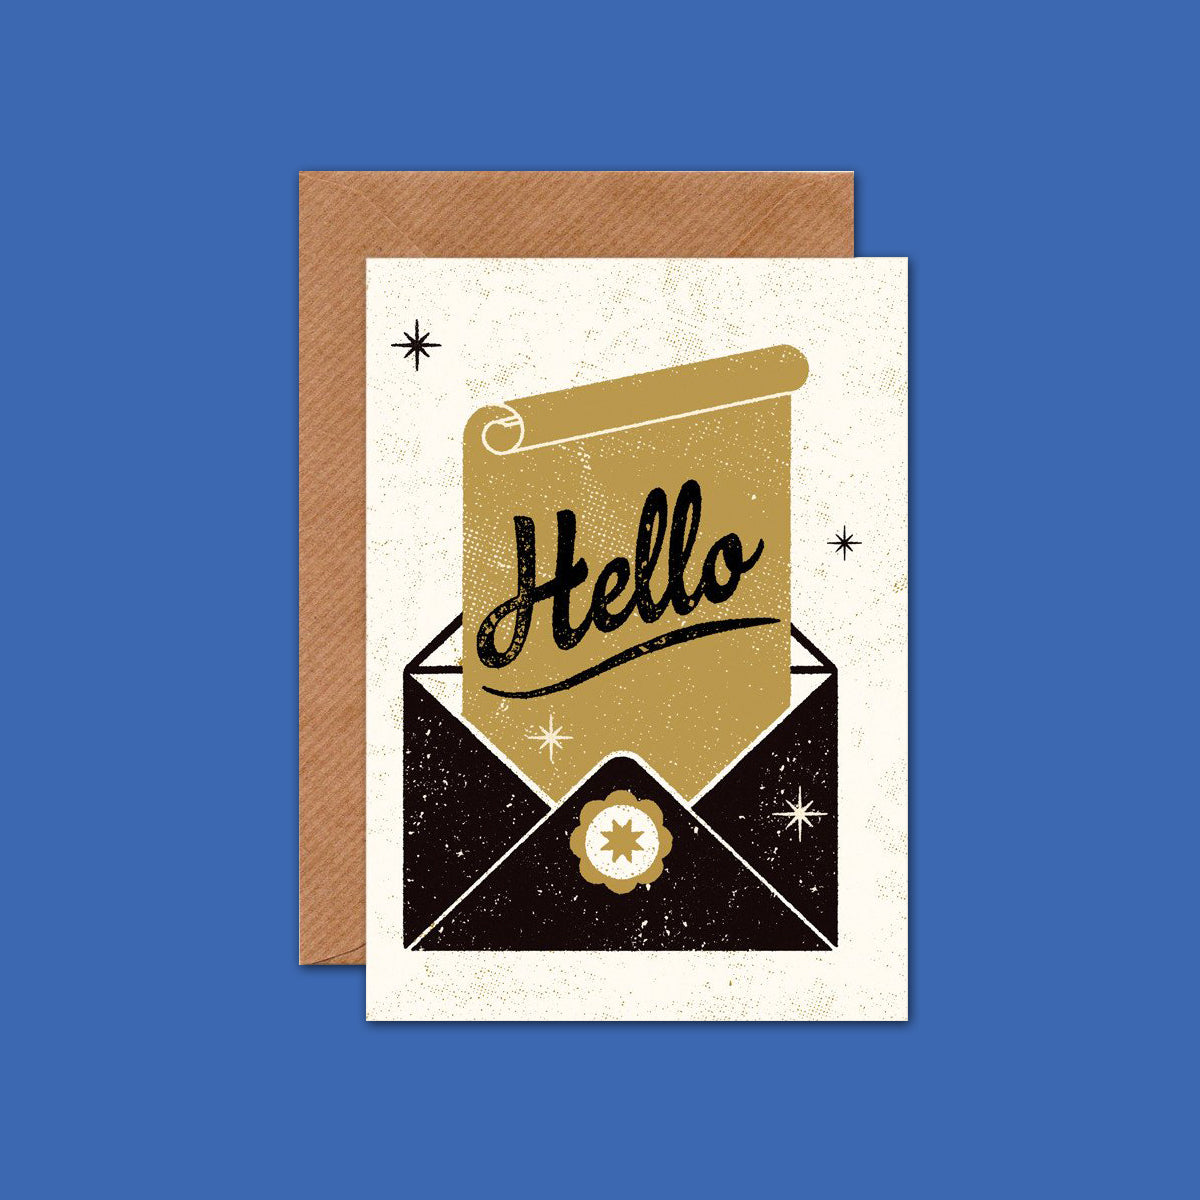 Retro Greeting Card Hello by Telegramme